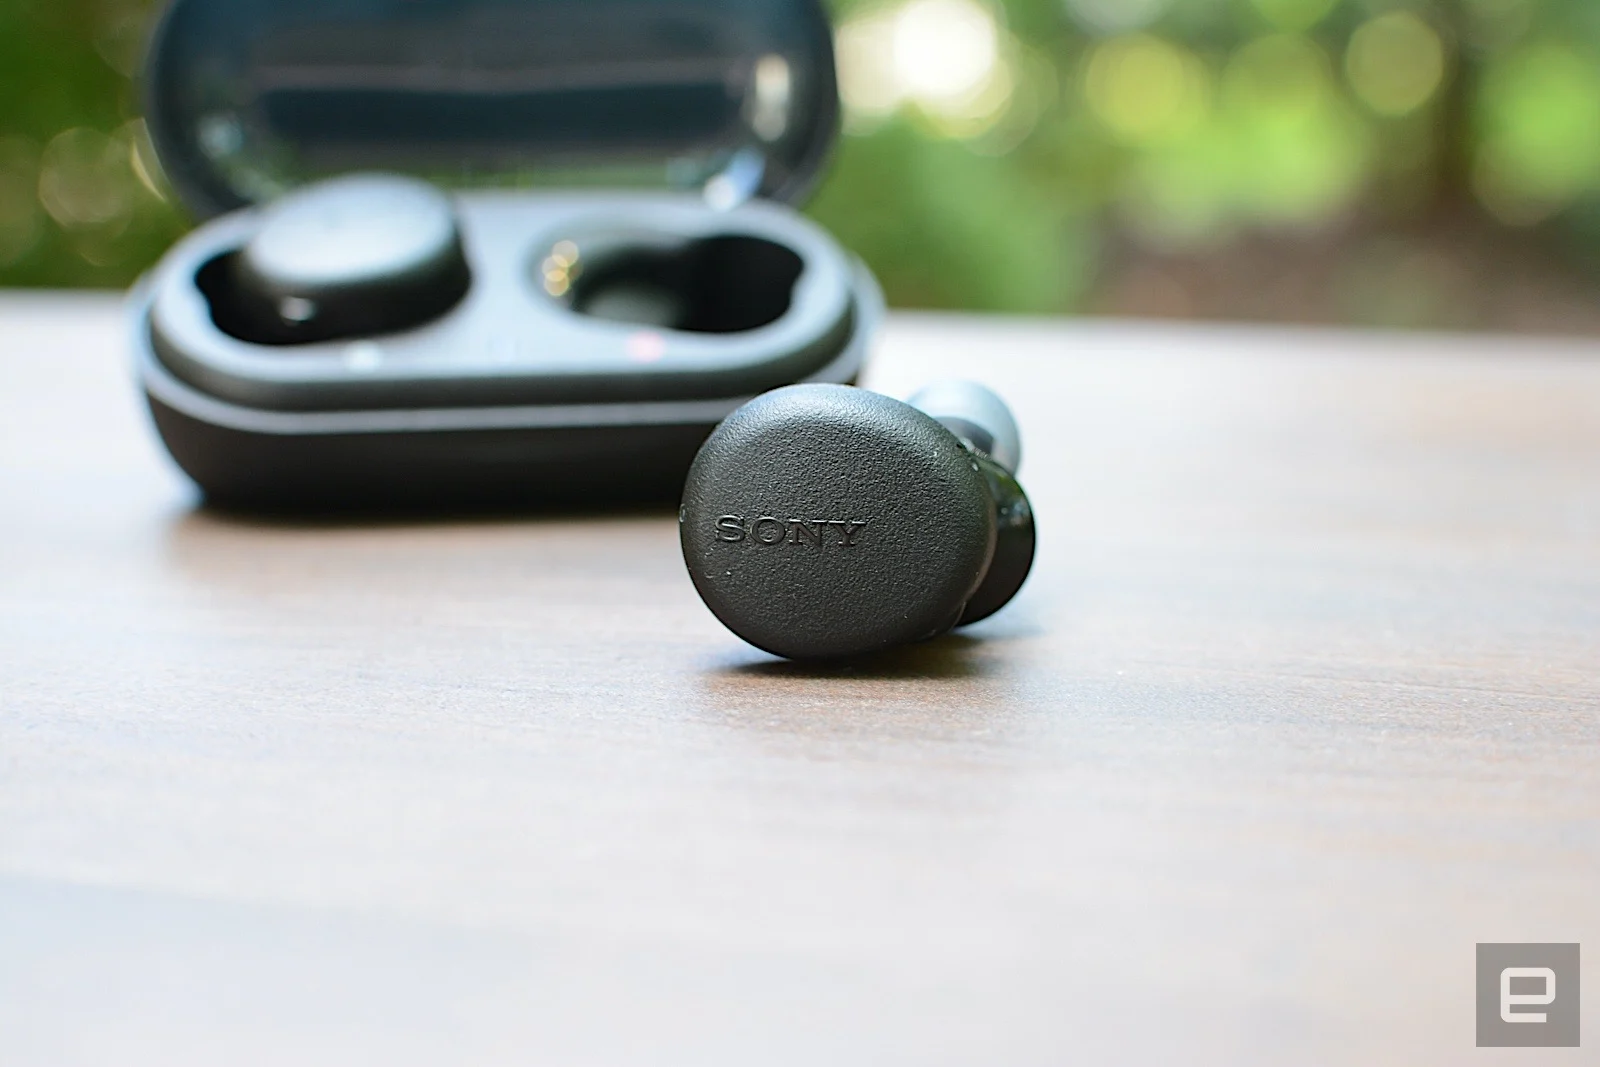 The company’s $130 true wireless model offers a lot for a little, but lacks key features.